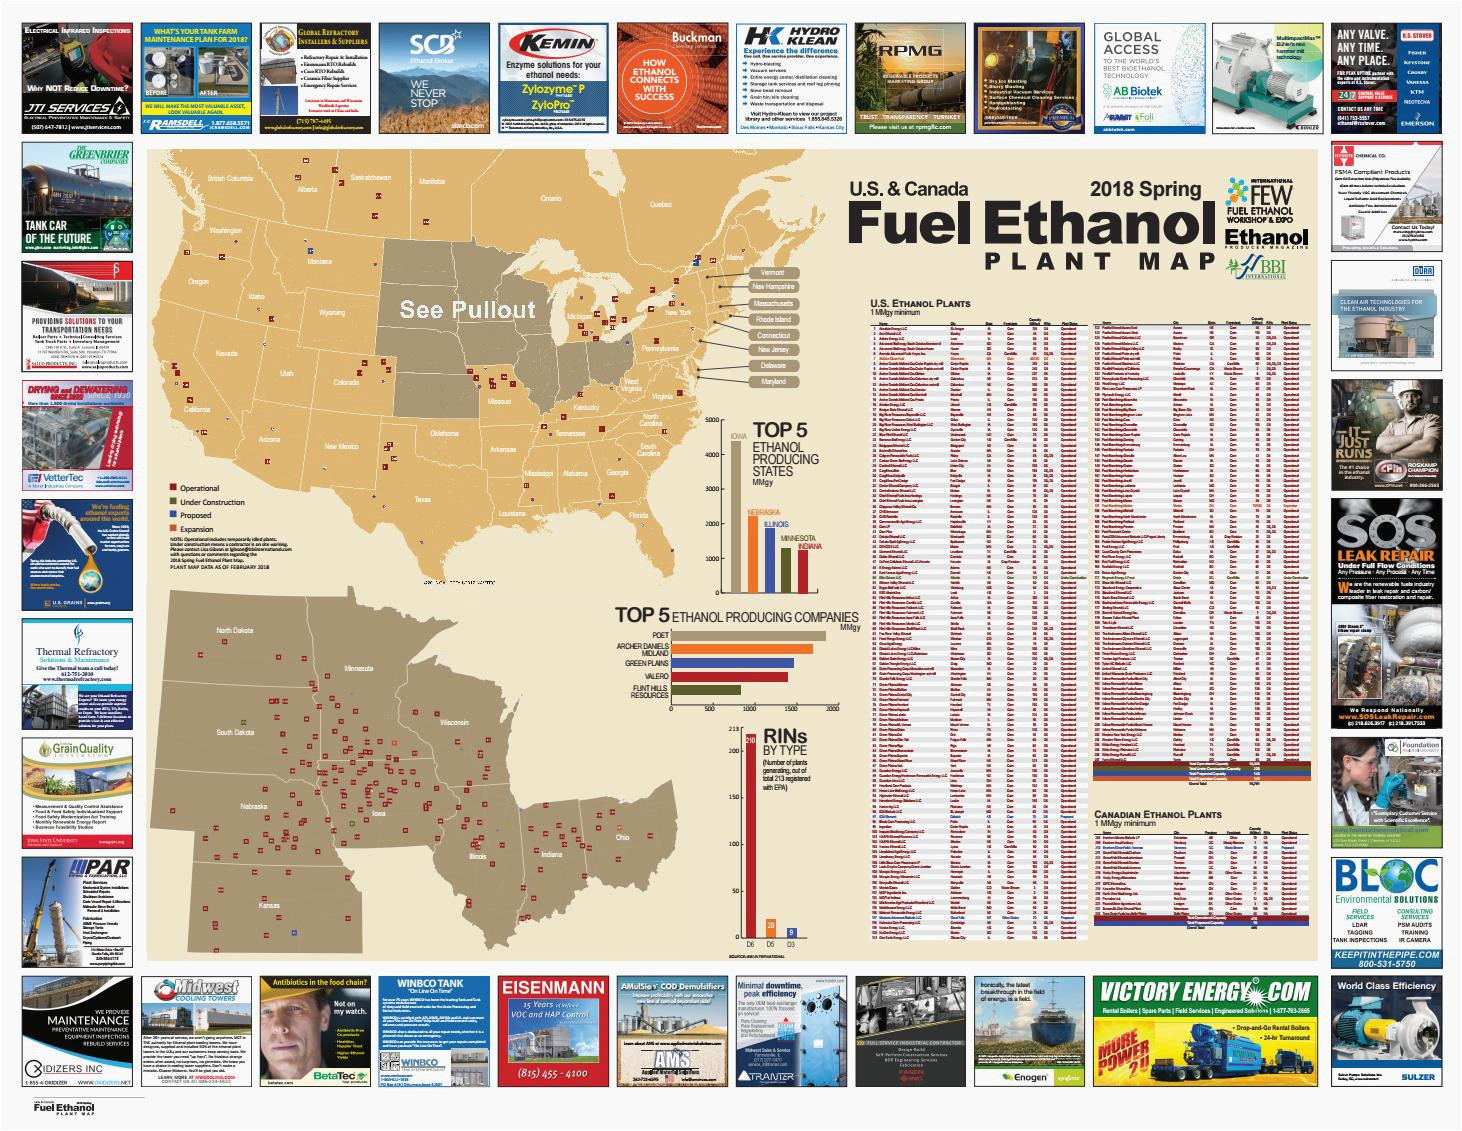 map of vernon texas spring 2018 u s and canada fuel ethanol plant